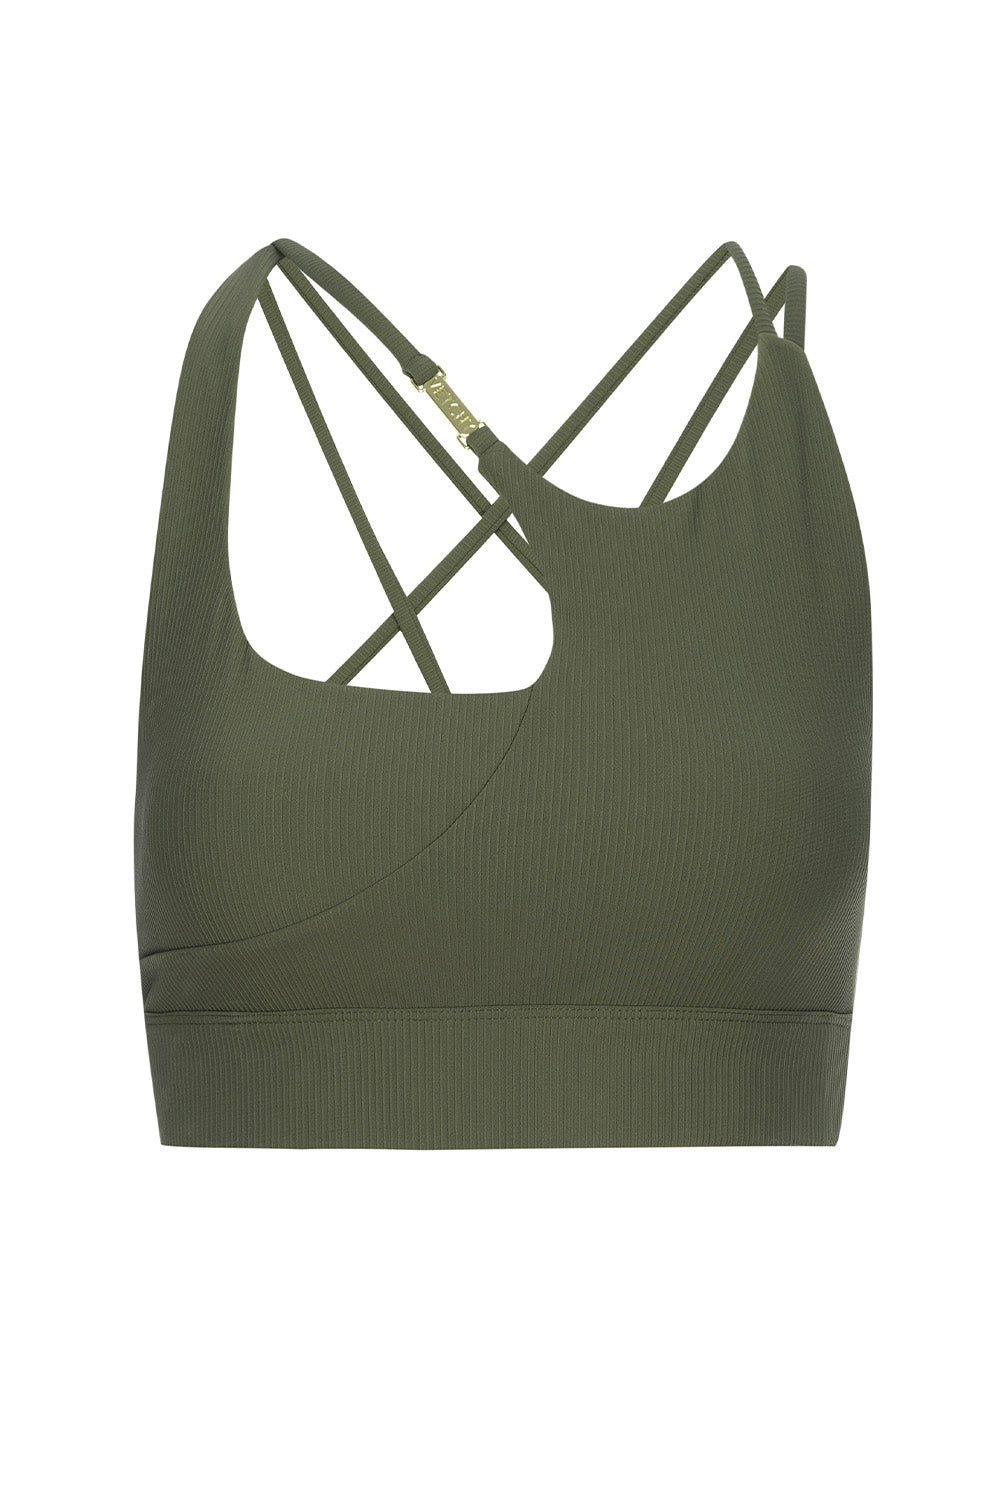 Melrose Army ribbed bra top on white background front view.